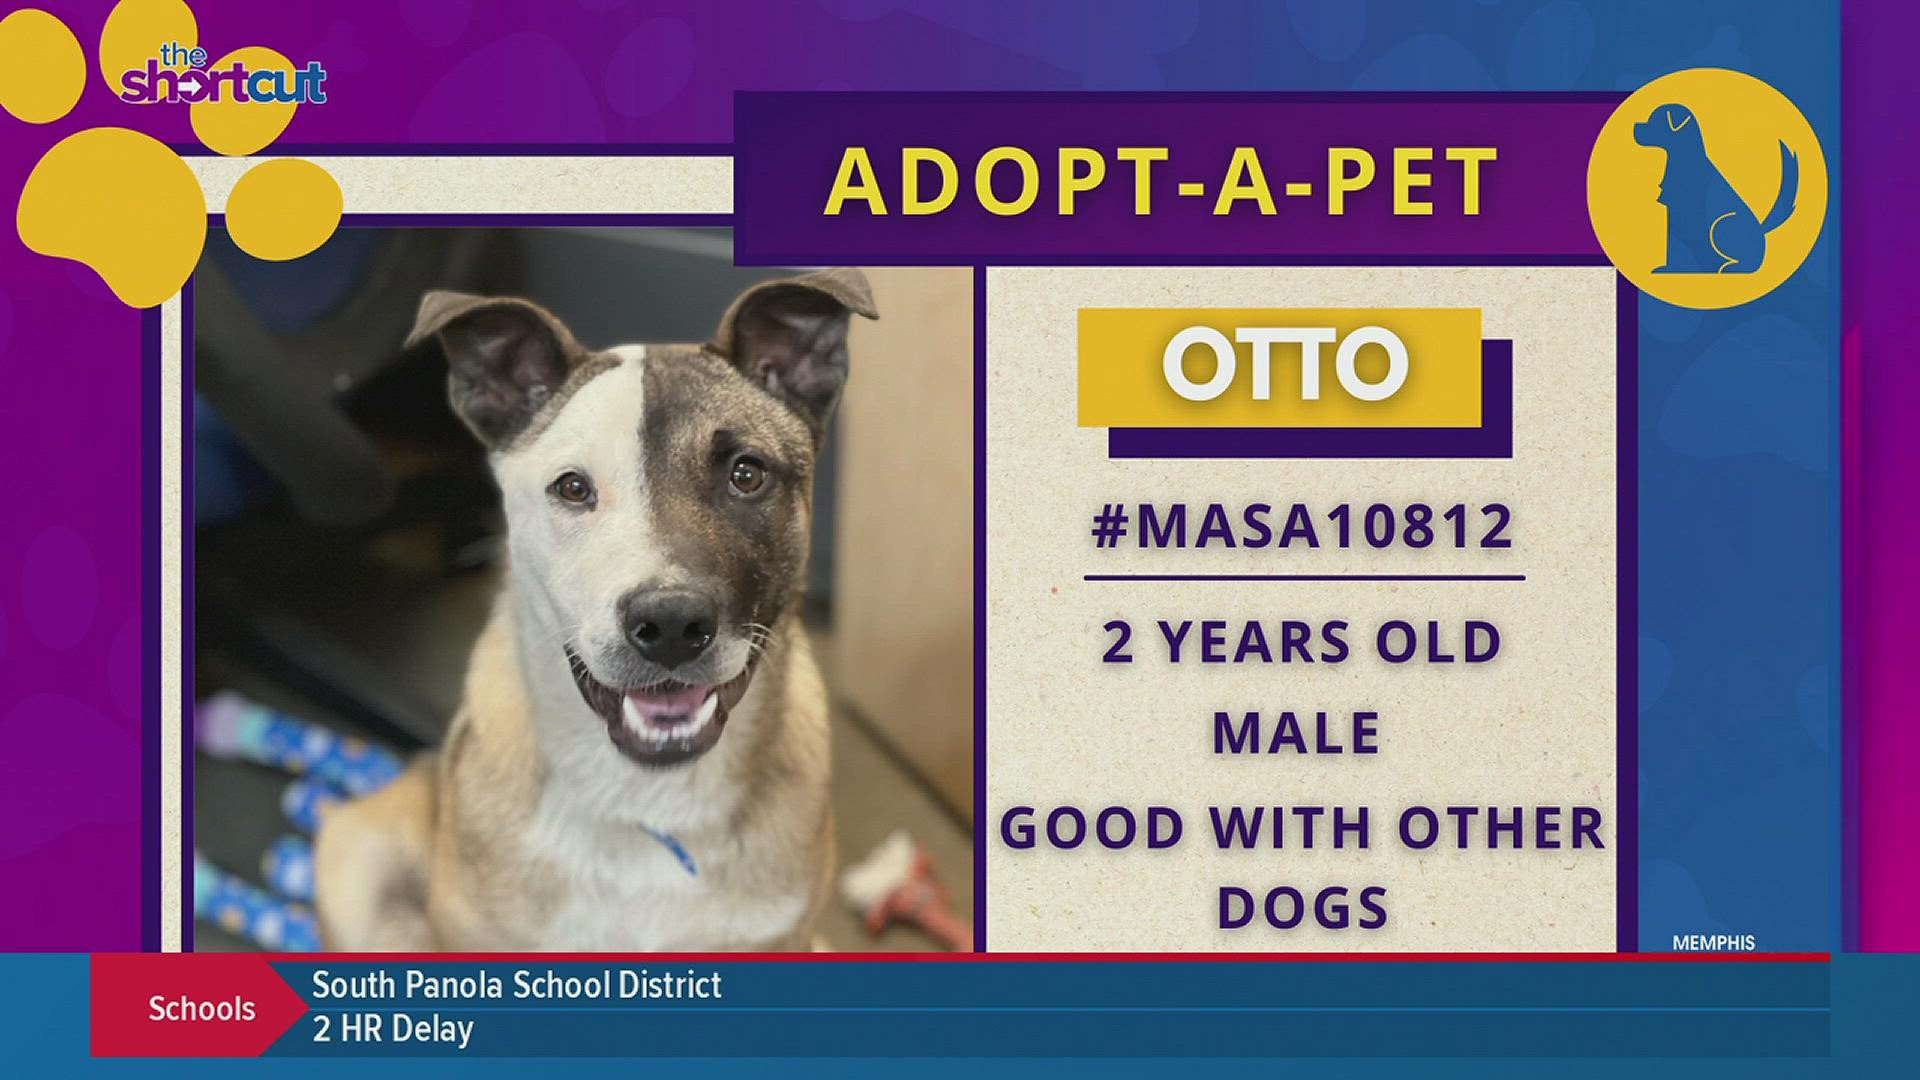 Looking to adopt or foster an adorable dog like Otto this Valentine's Day? Check out what Memphis Animal Services (MAS) is offering this year! Featuring Alexis Pugh!